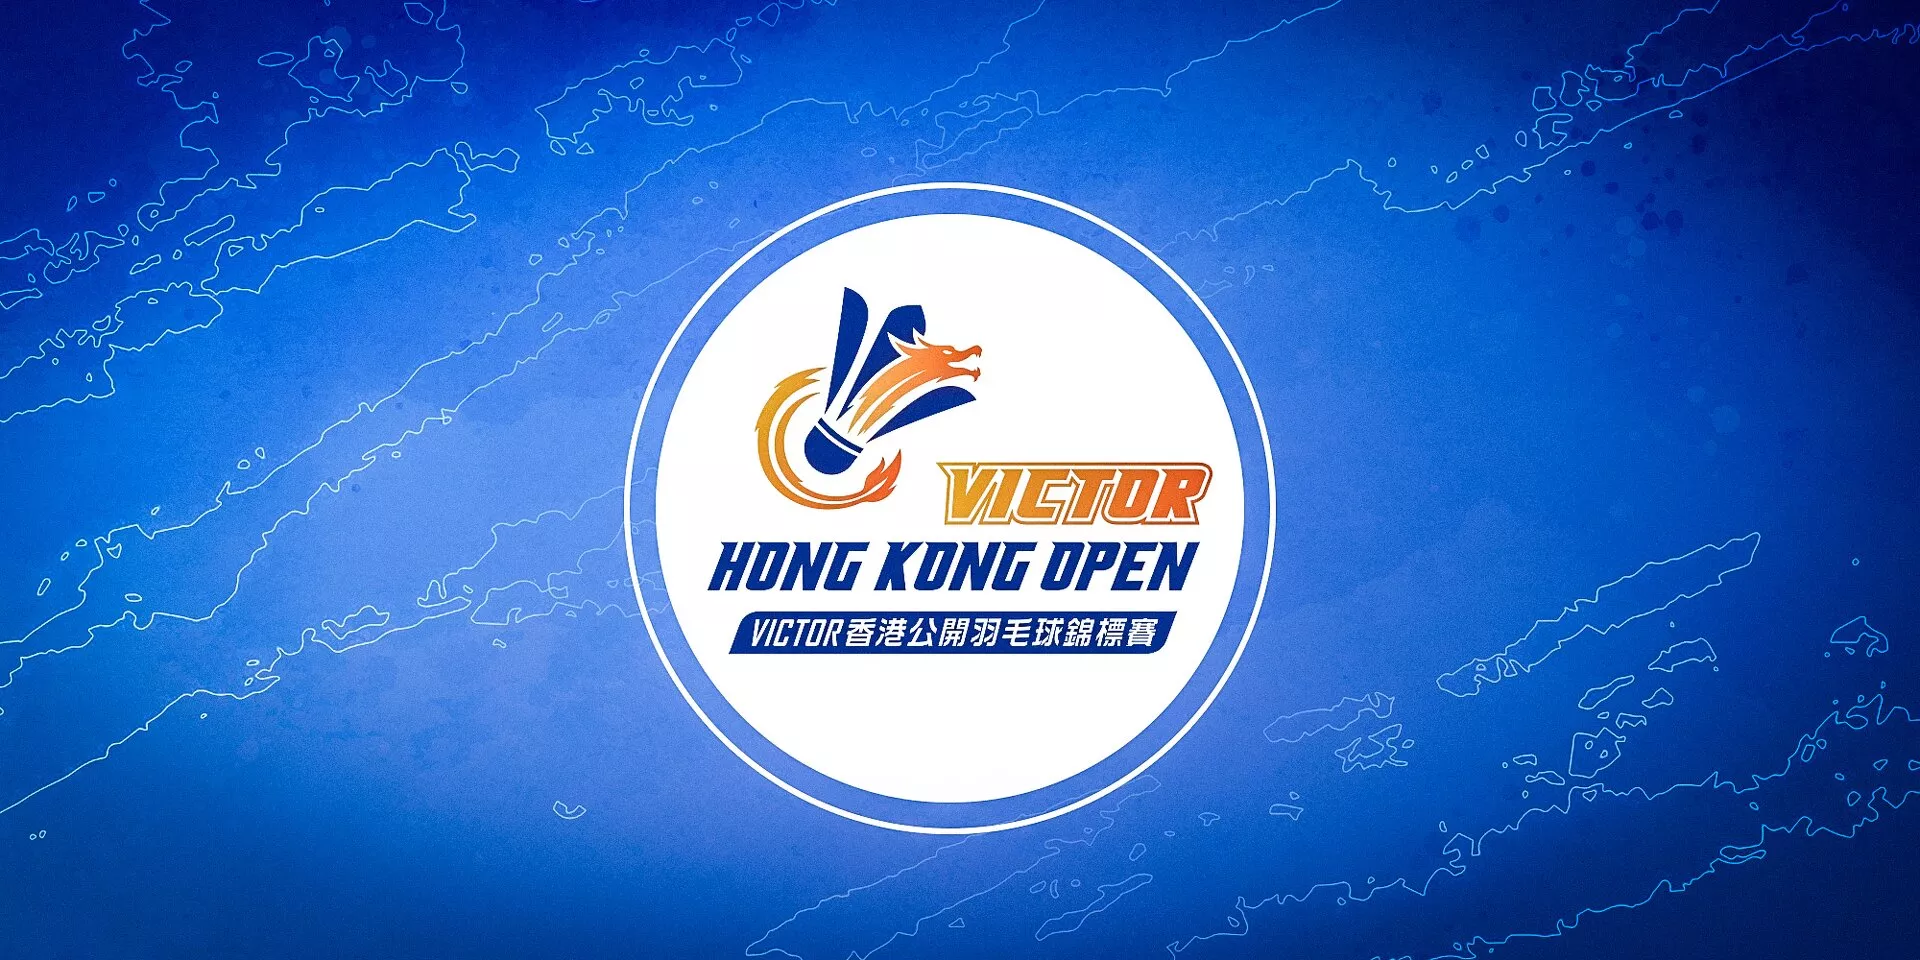 Where and how to watch Hong Kong Open 2023 live in Singapore?